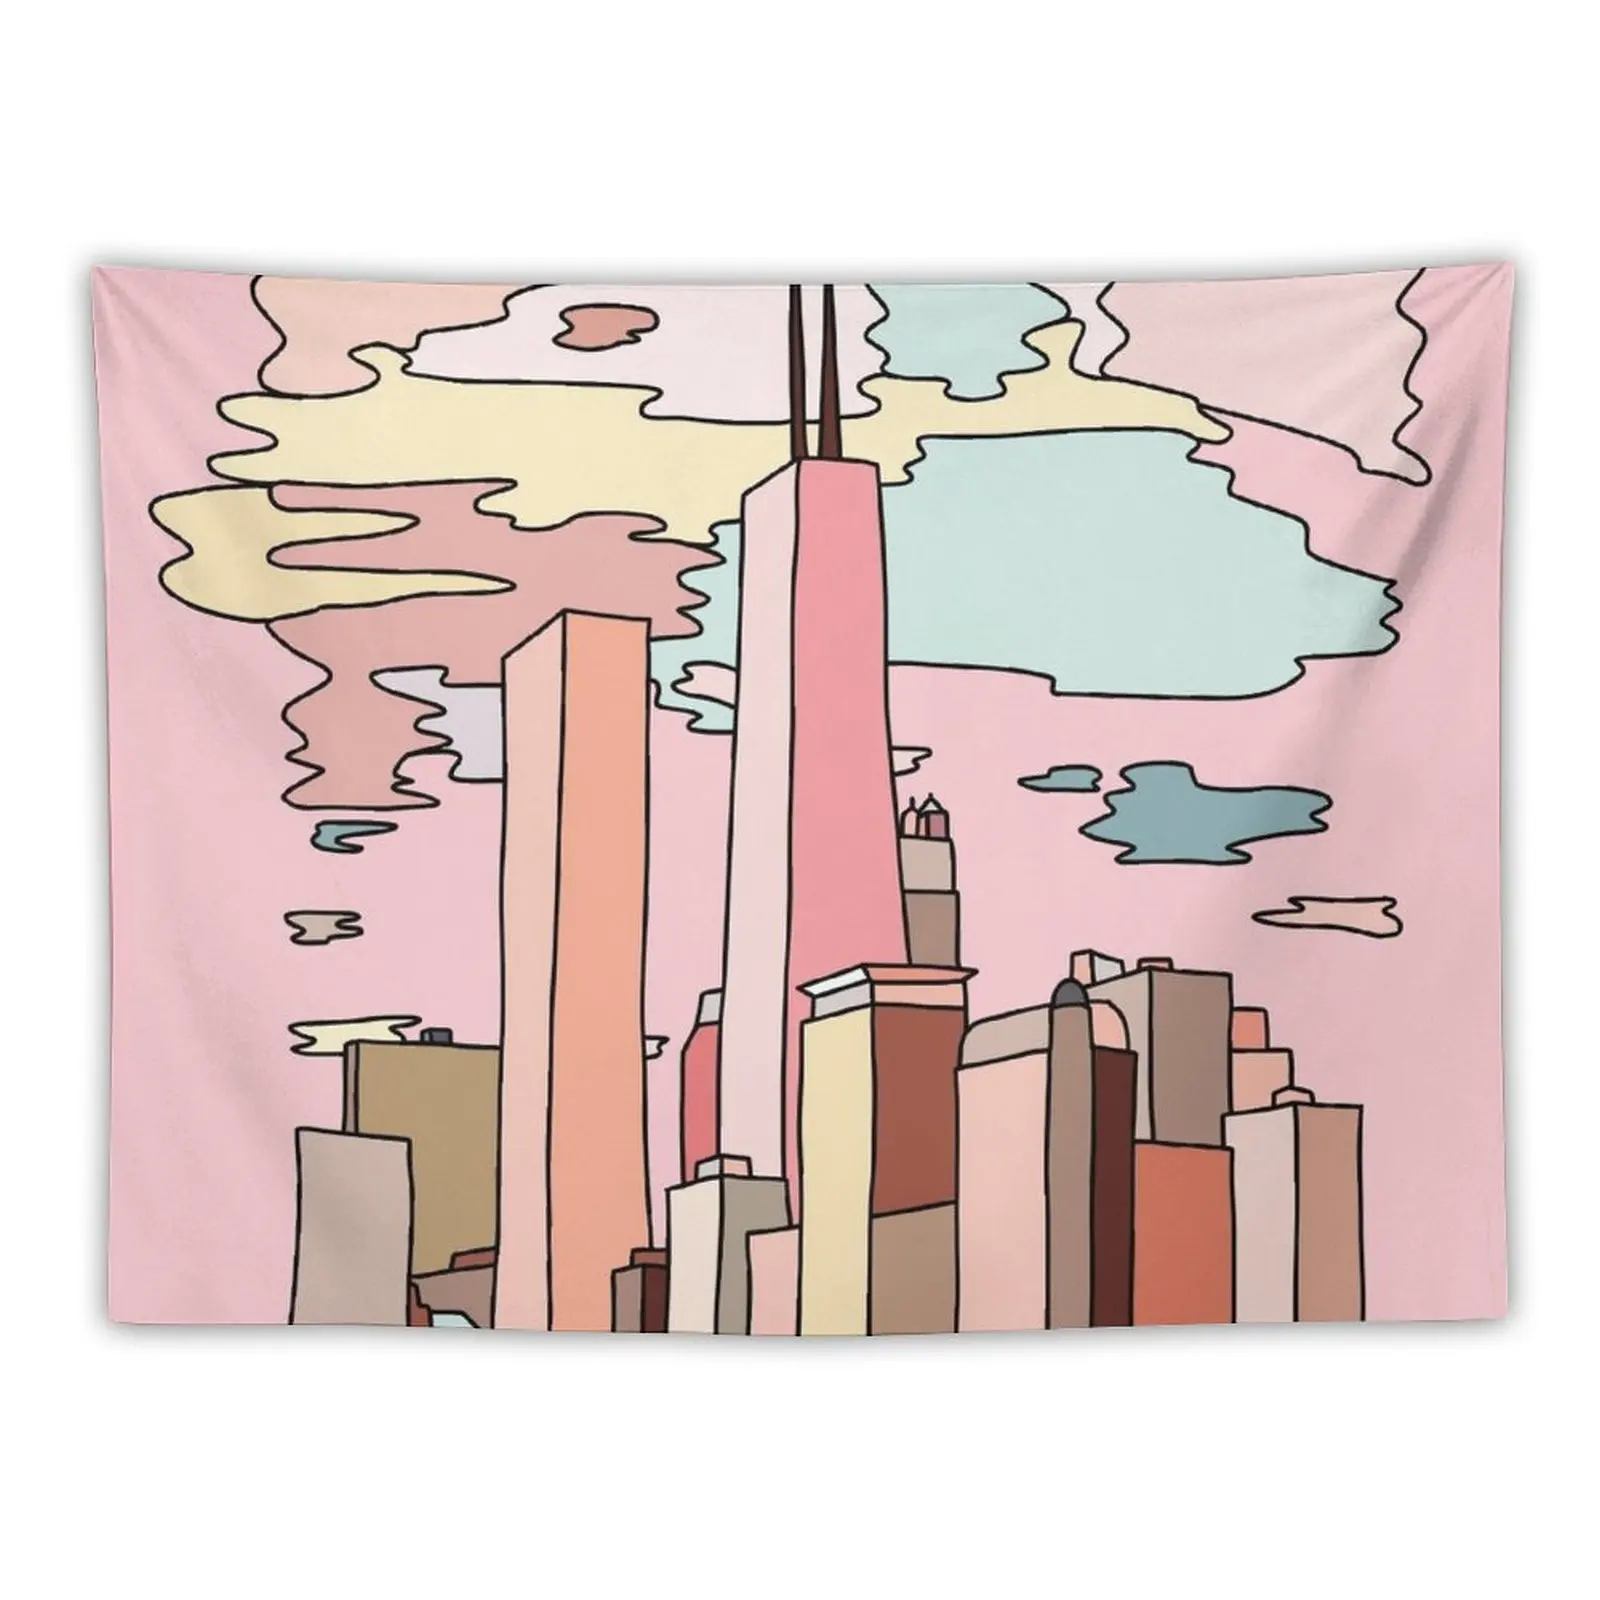 

Chicago sunset by Sasa Elebea Tapestry Wall Hanging Wall Aesthetic Room Decoration Tapete For The Wall Decor For Room Tapestry